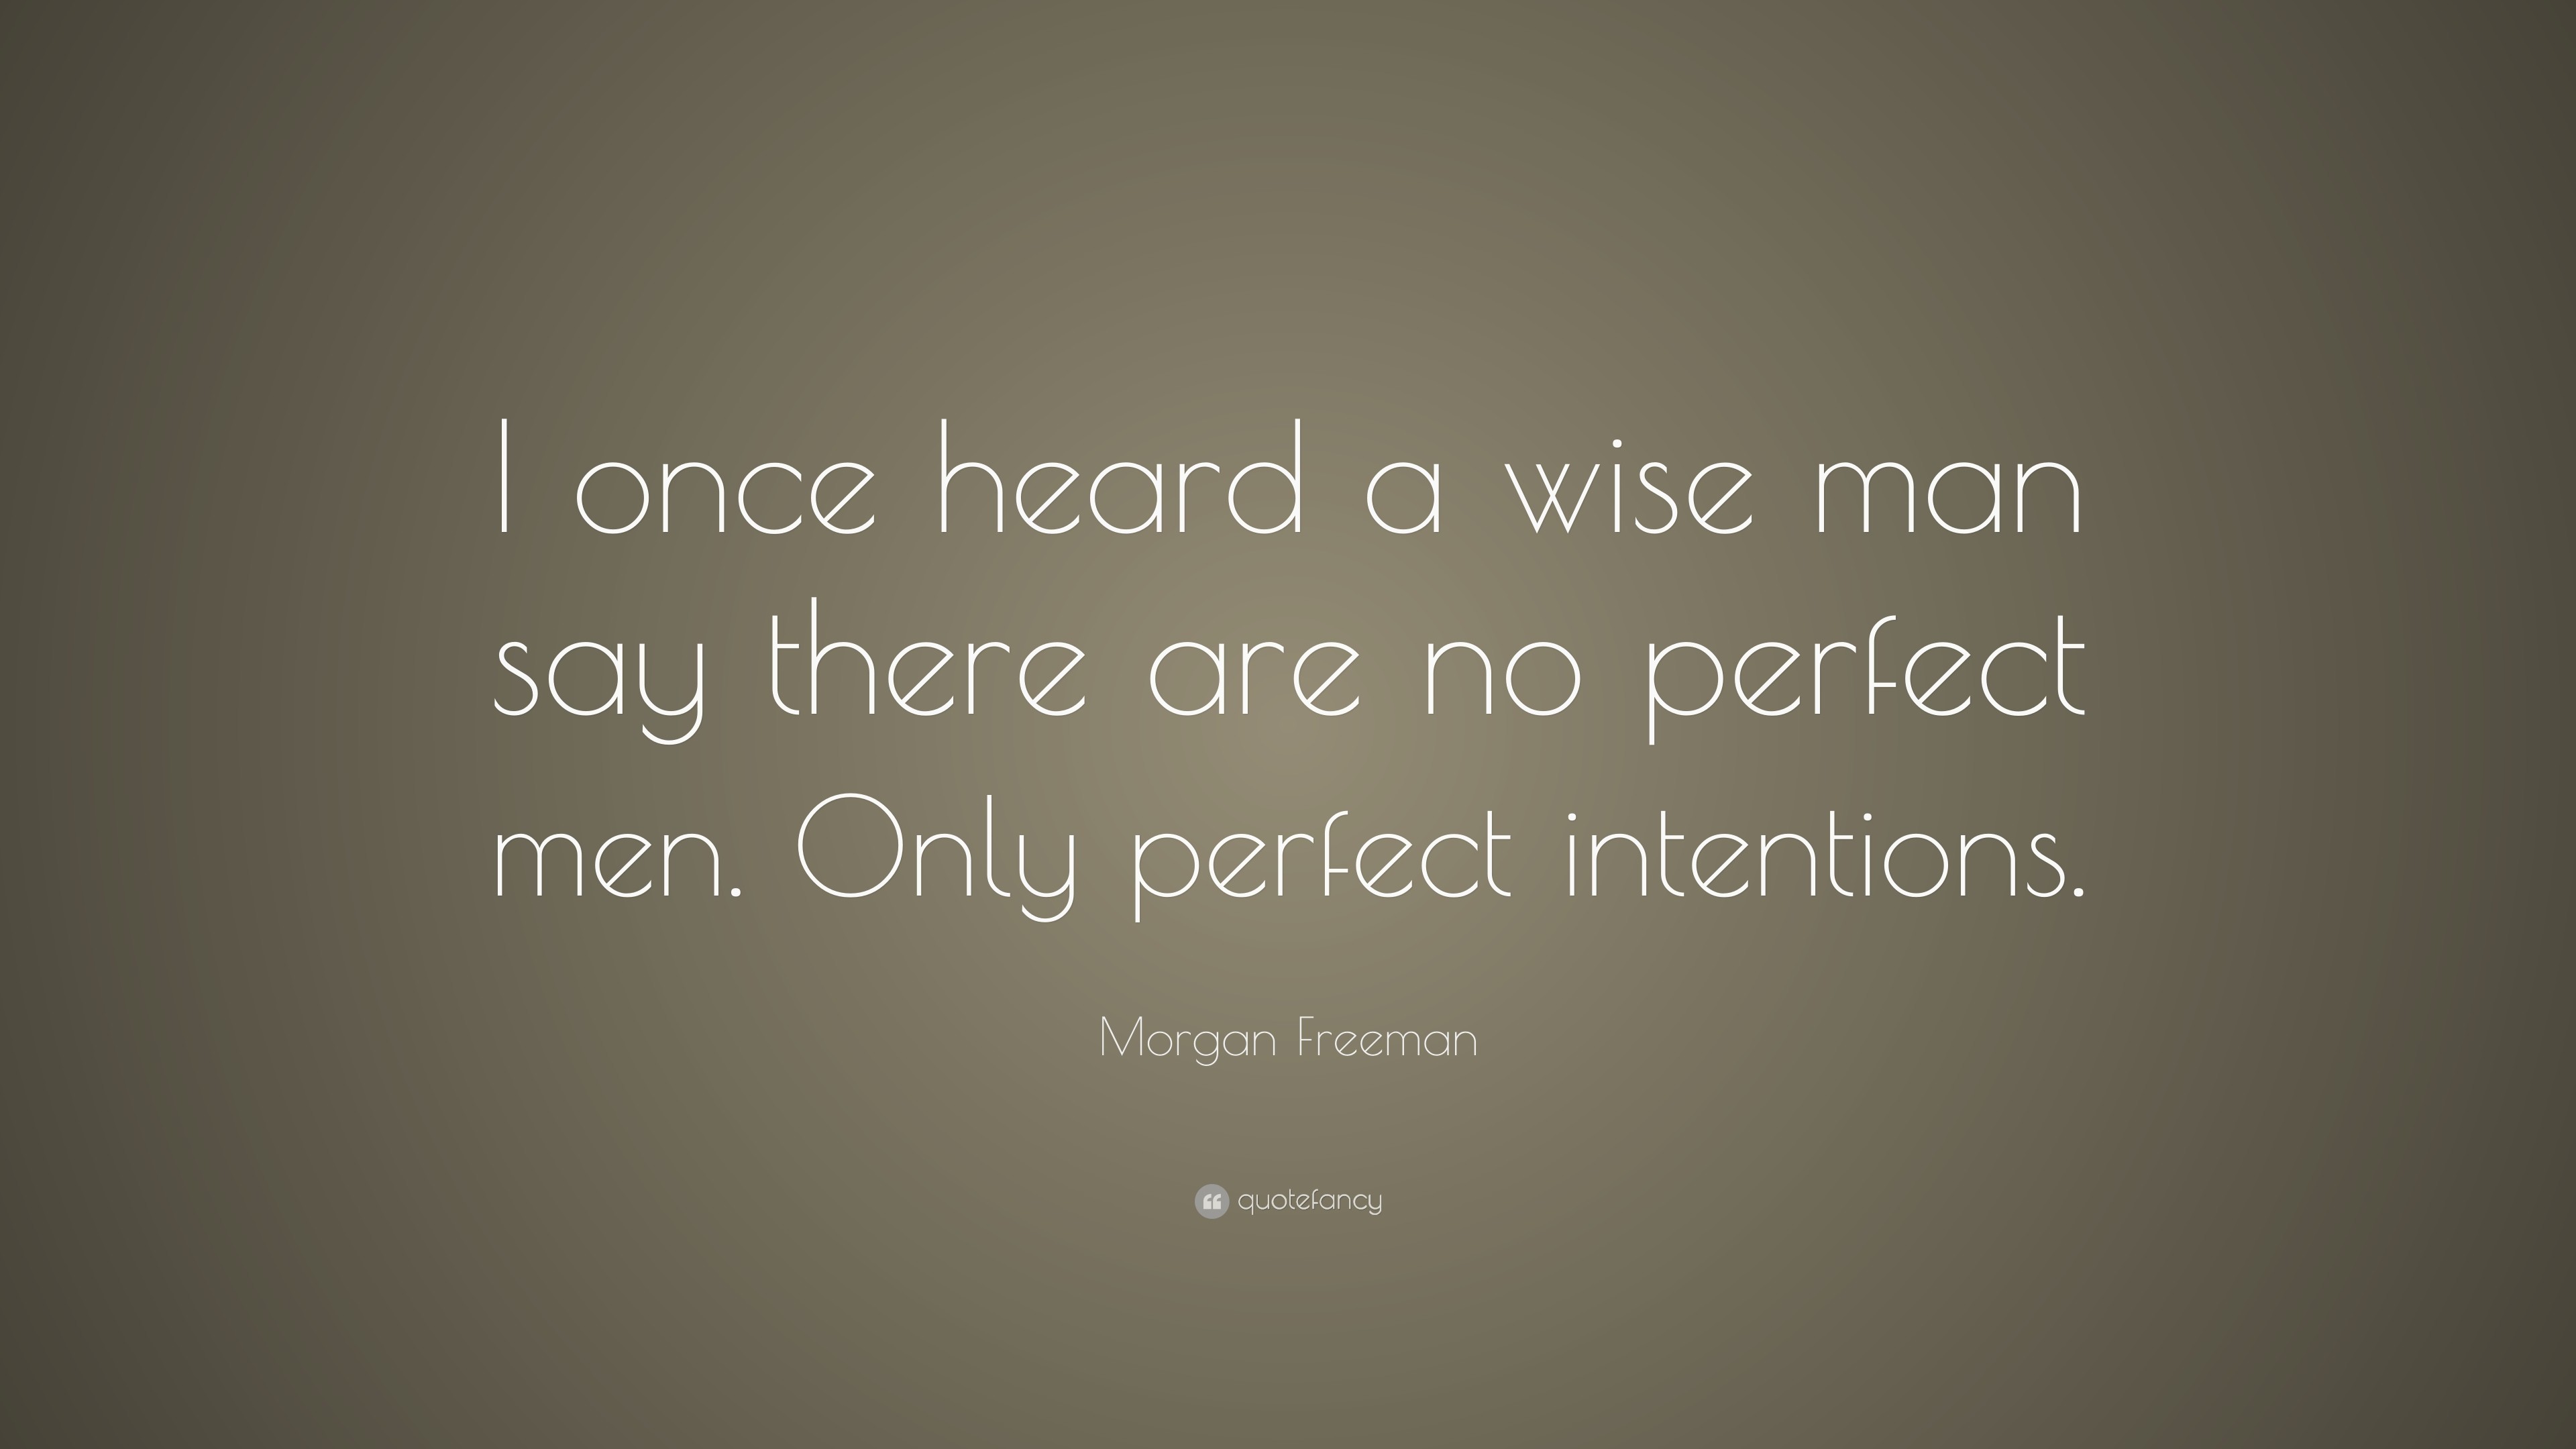 3840x2160 Morgan Freeman Quote: “I once heard a wise man say there are no perfect